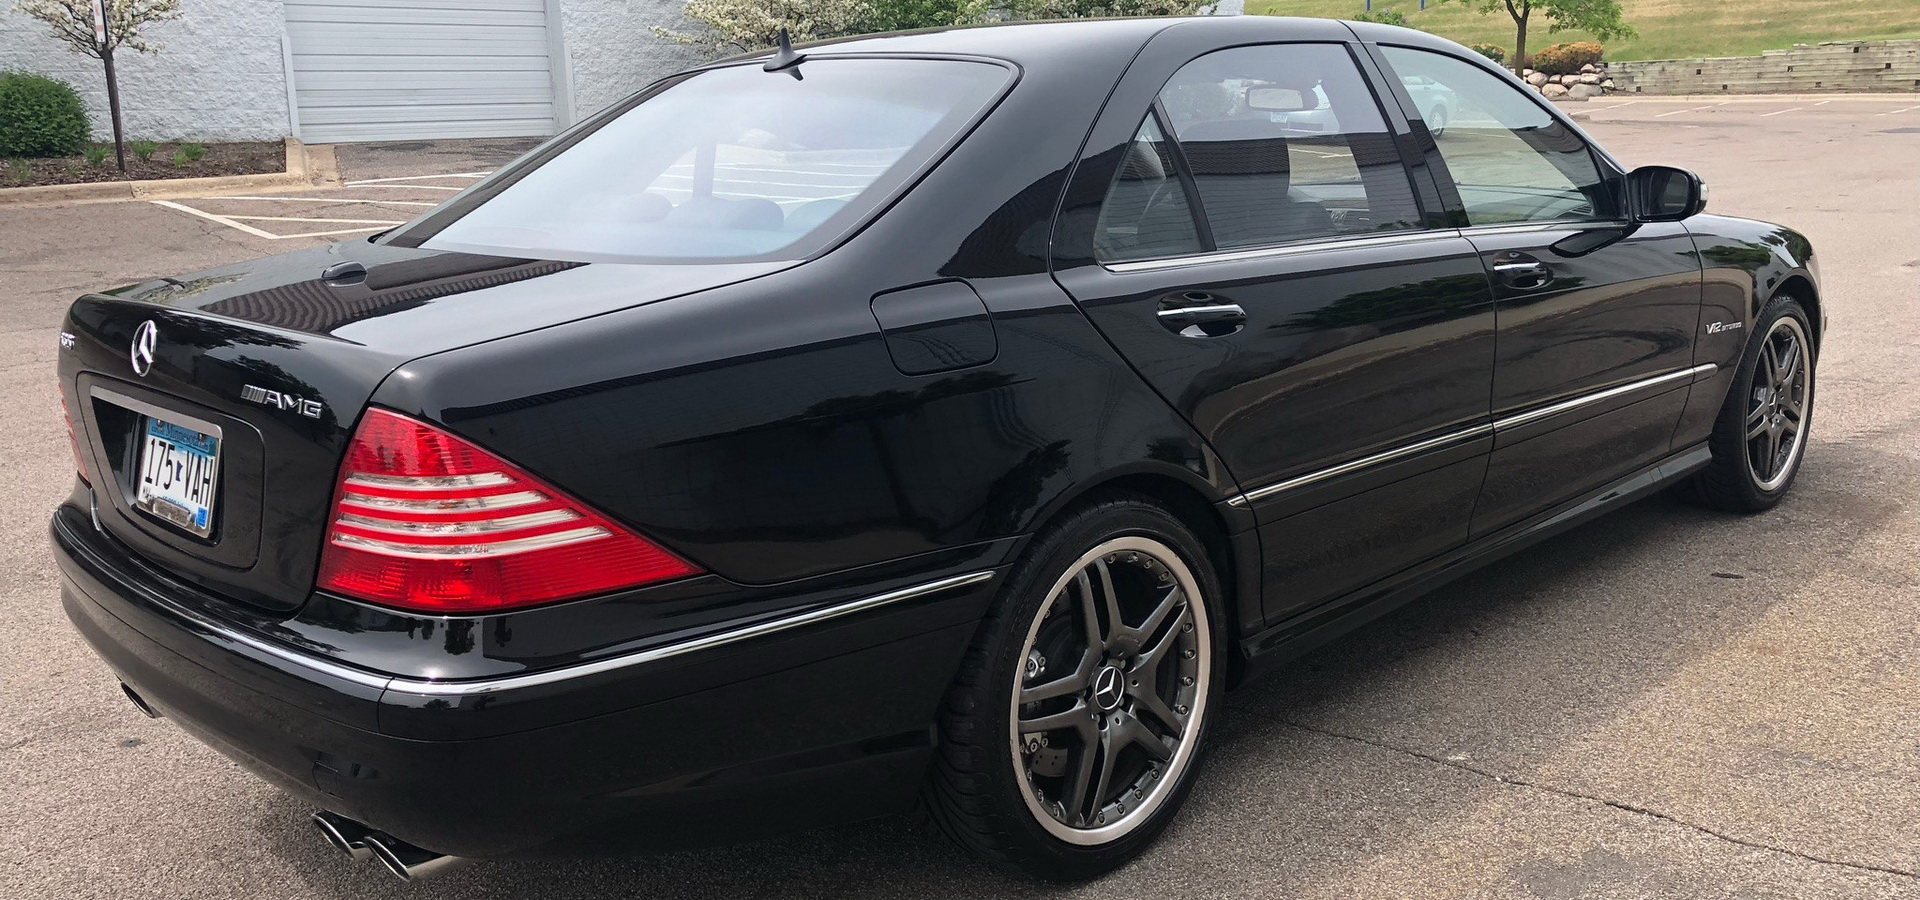 You Can Get A Super Clean 604 Hp Mercedes S65 Amg For Less Than 20k Carscoops